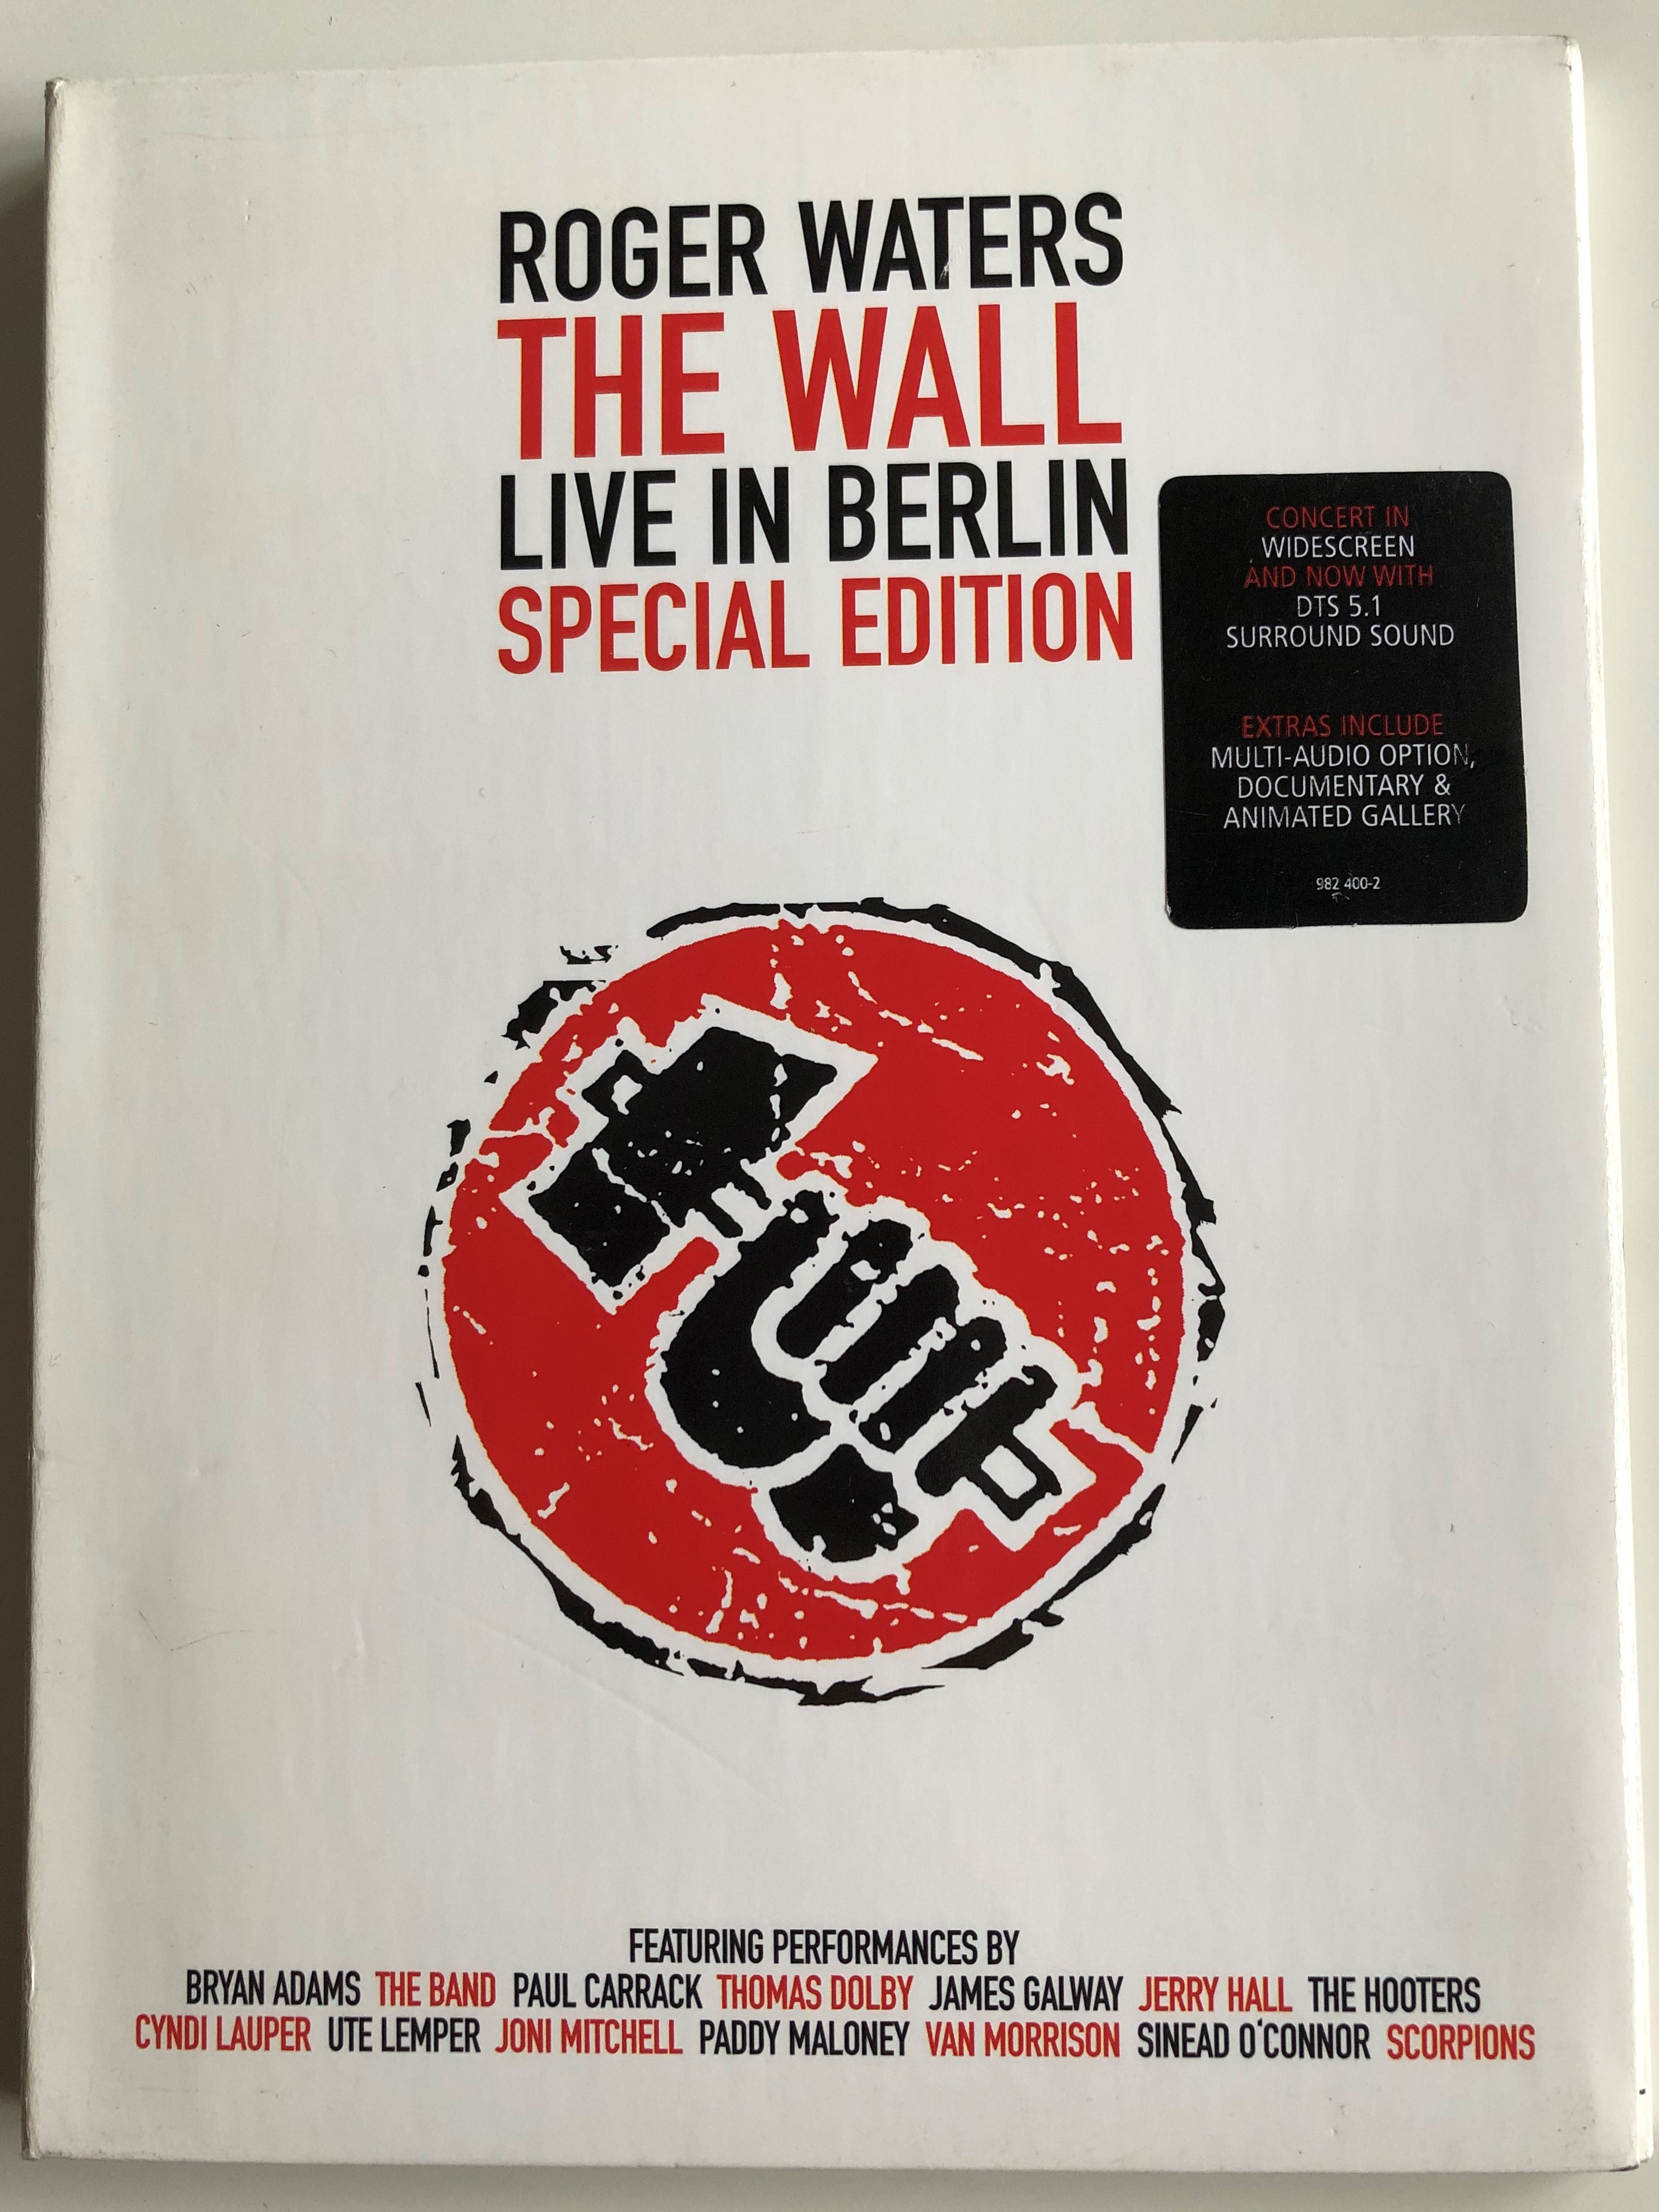 Roger Waters - The Wall DVD Live in Berlin Special Edition / Featuring  Bryan Adams, The Hooters, Cyndi Lauper, Van Morrison, Scorpions / Universal  Music - bibleinmylanguage